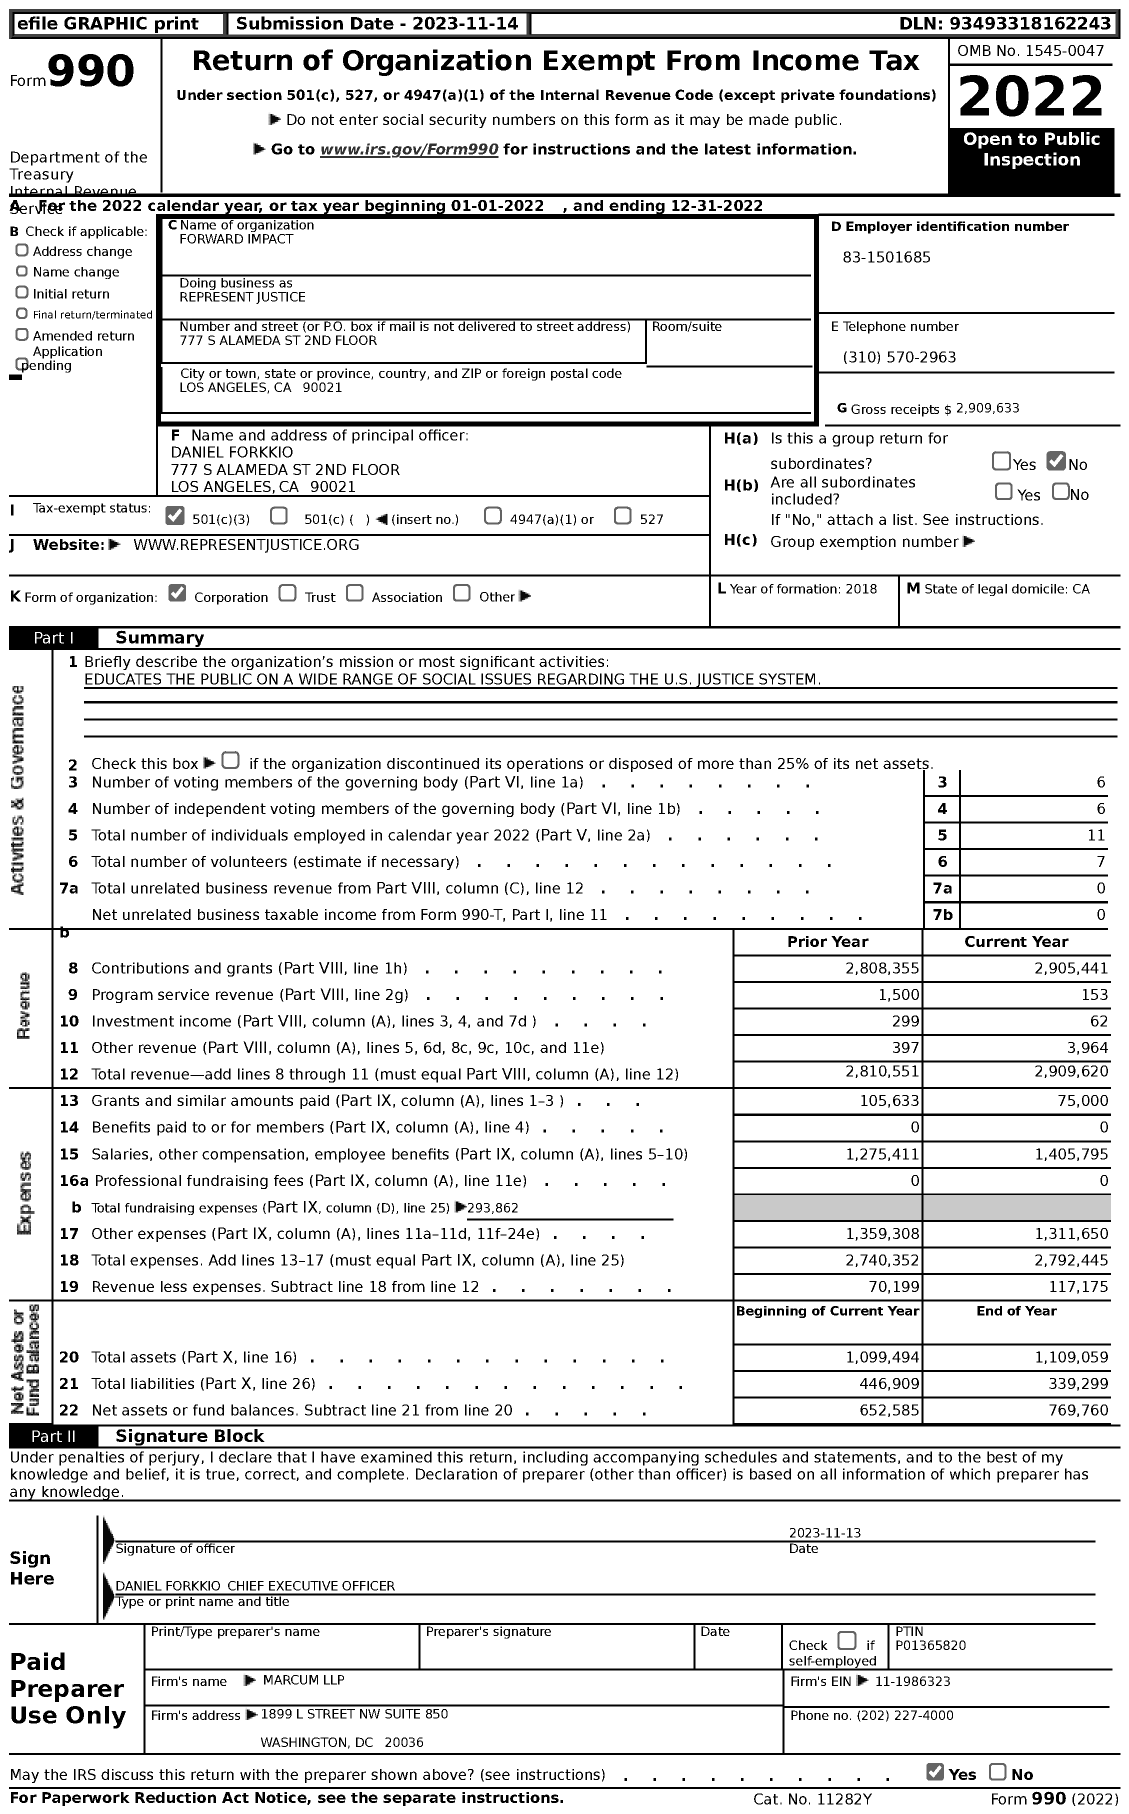 Image of first page of 2022 Form 990 for Represent Justice